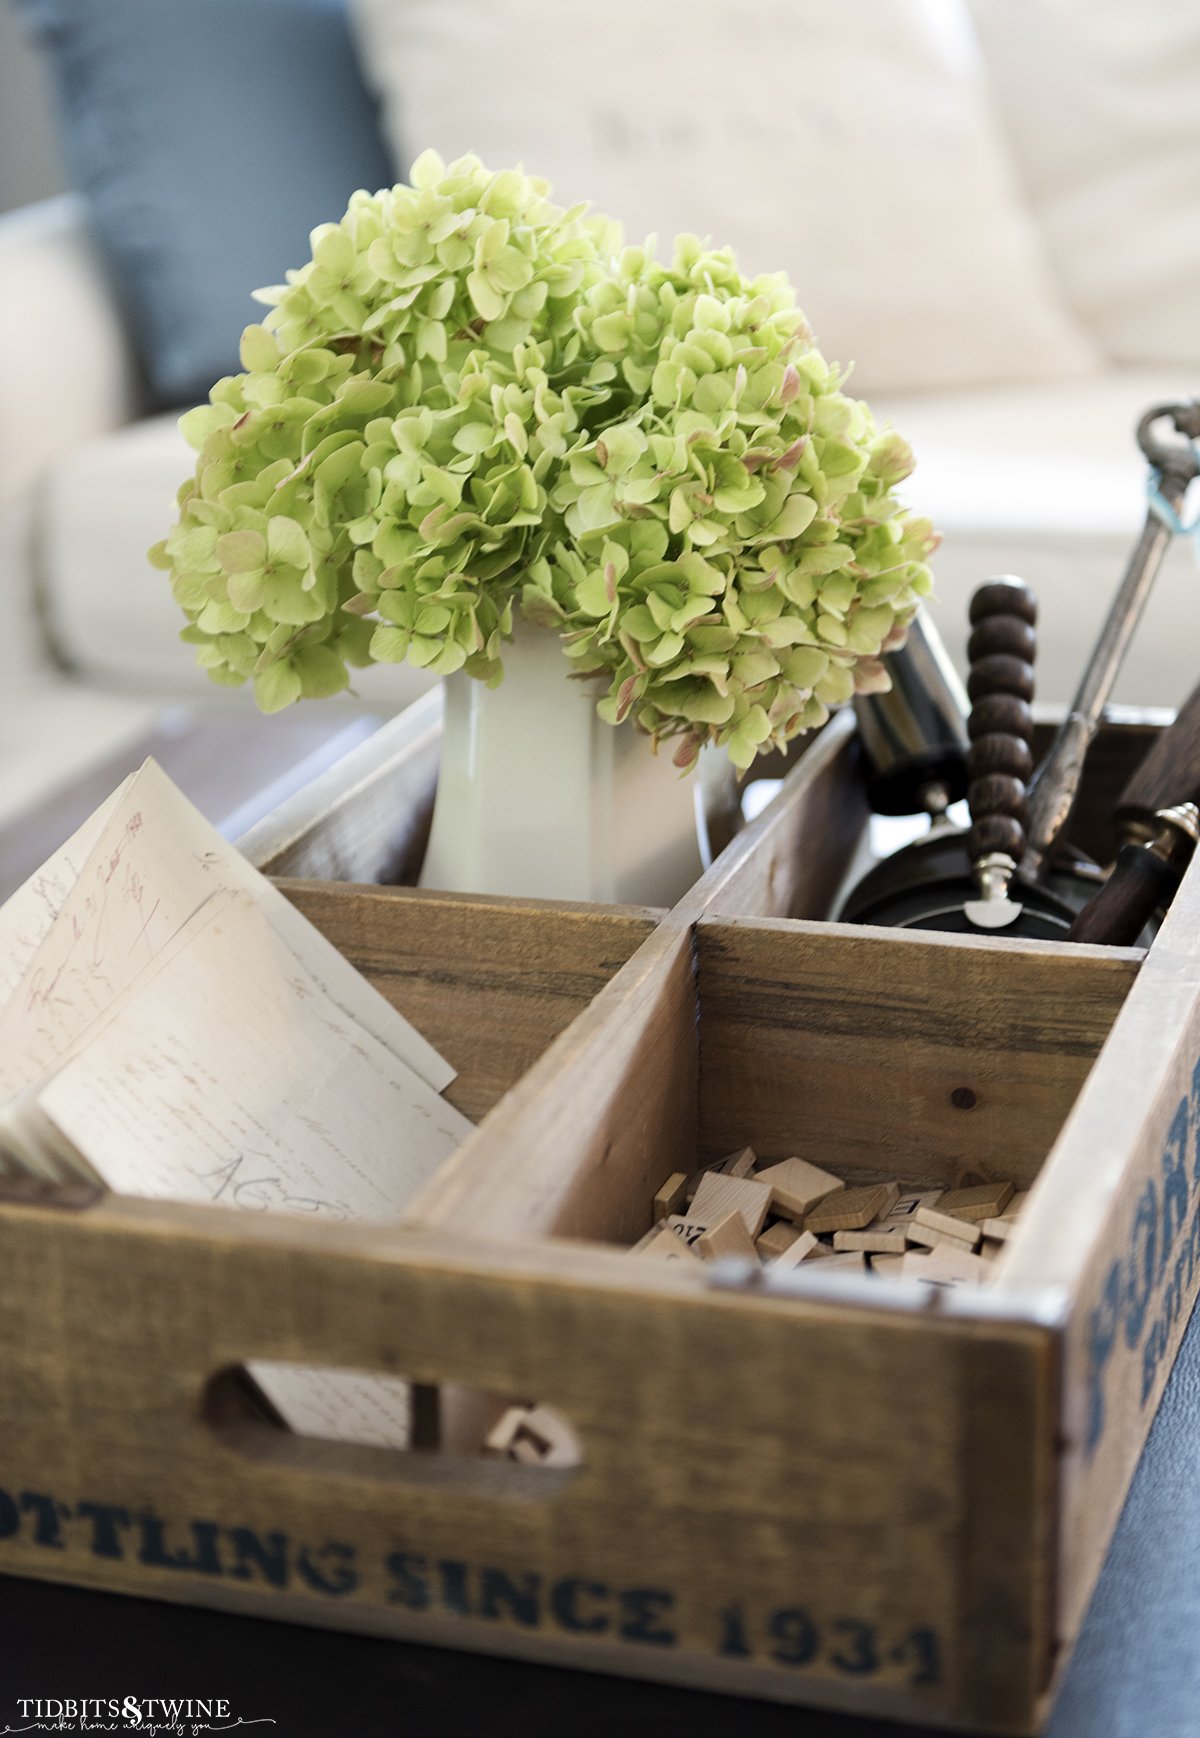 white ironstone vase filled with green hydrangea that are drying in a wooden box with magnifying glasses and scrabble tiles on coffee table